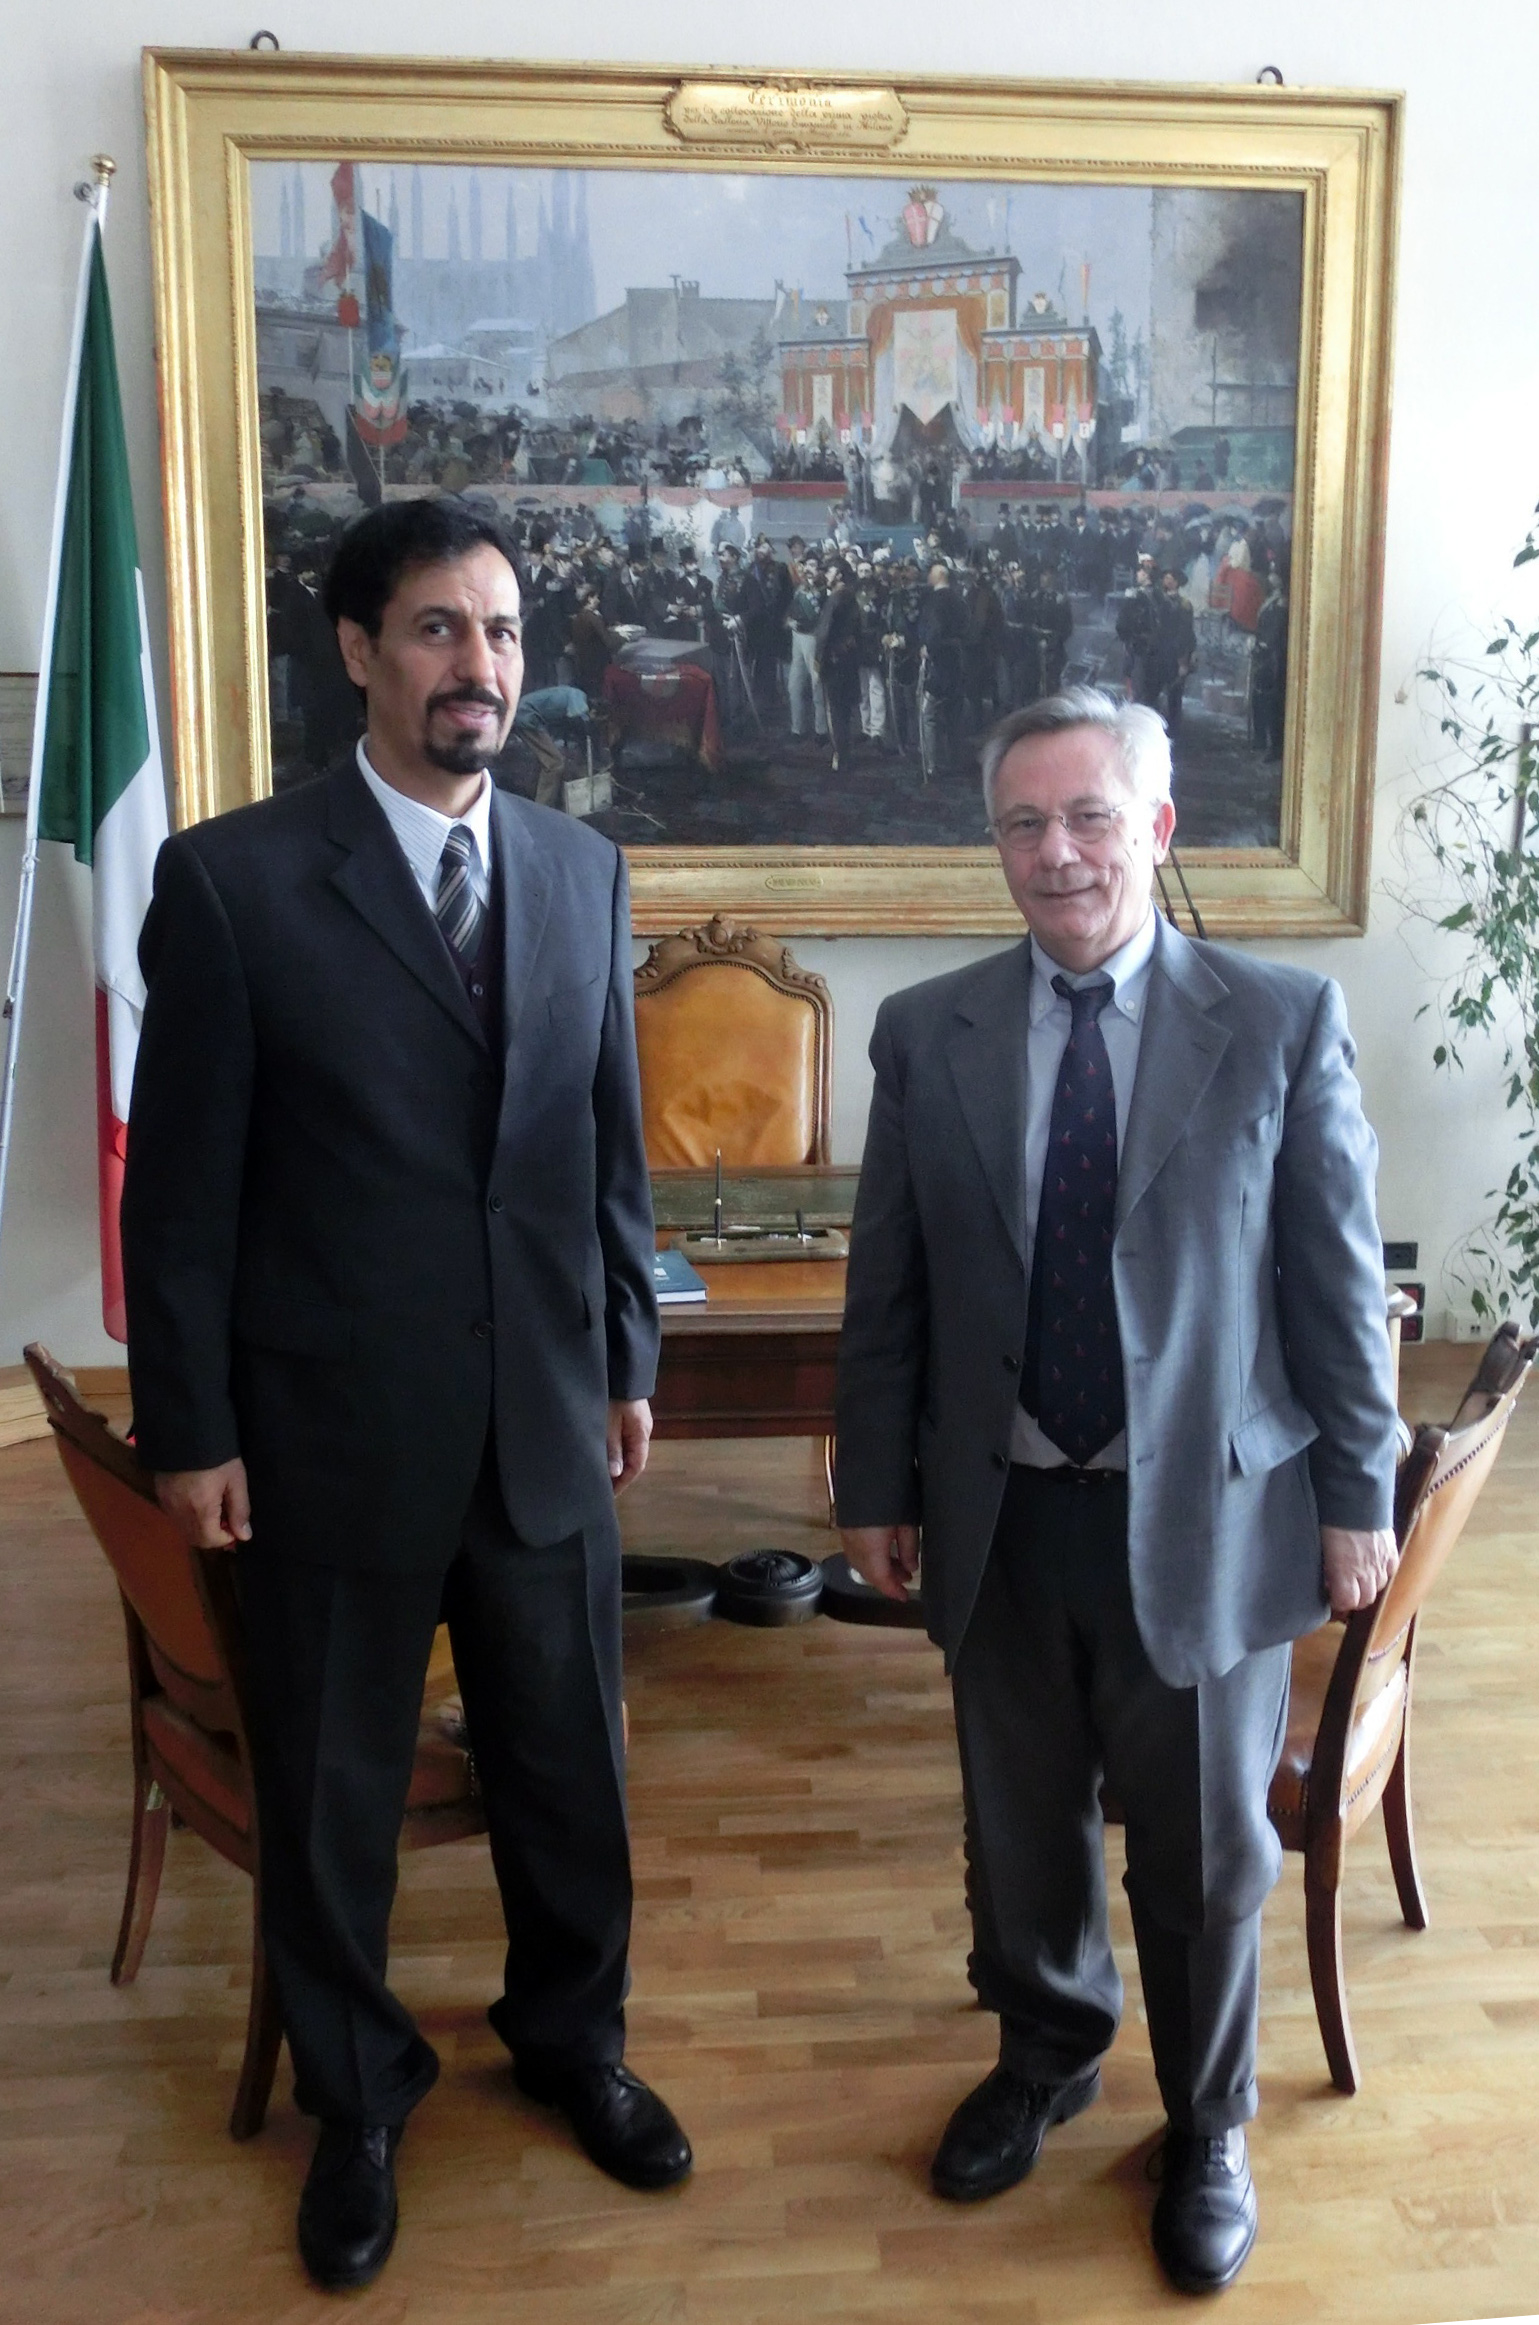 The State of Kuwait Ambassador to Italy, Sheikh Ali Al-Khaled Al-Jaber Al-Sabah with the head of the Italian central archive, Agostino Attanasio